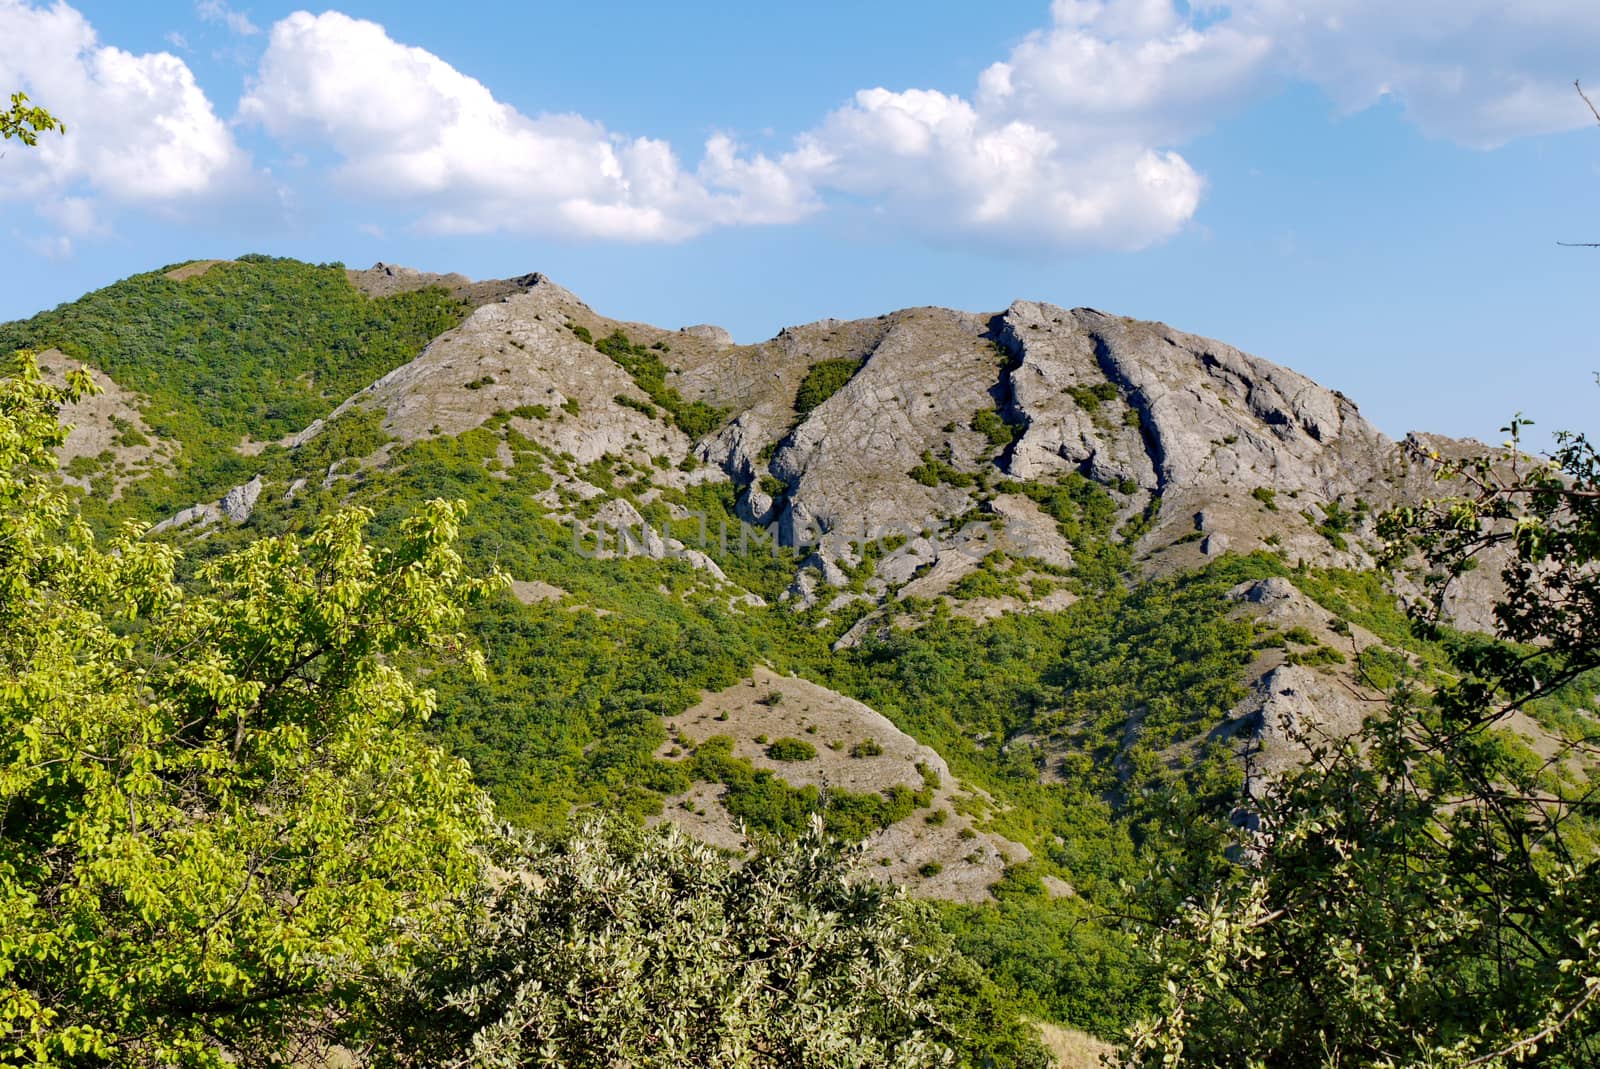 wide green bushes on the background of grass-covered mountains under the blue sky